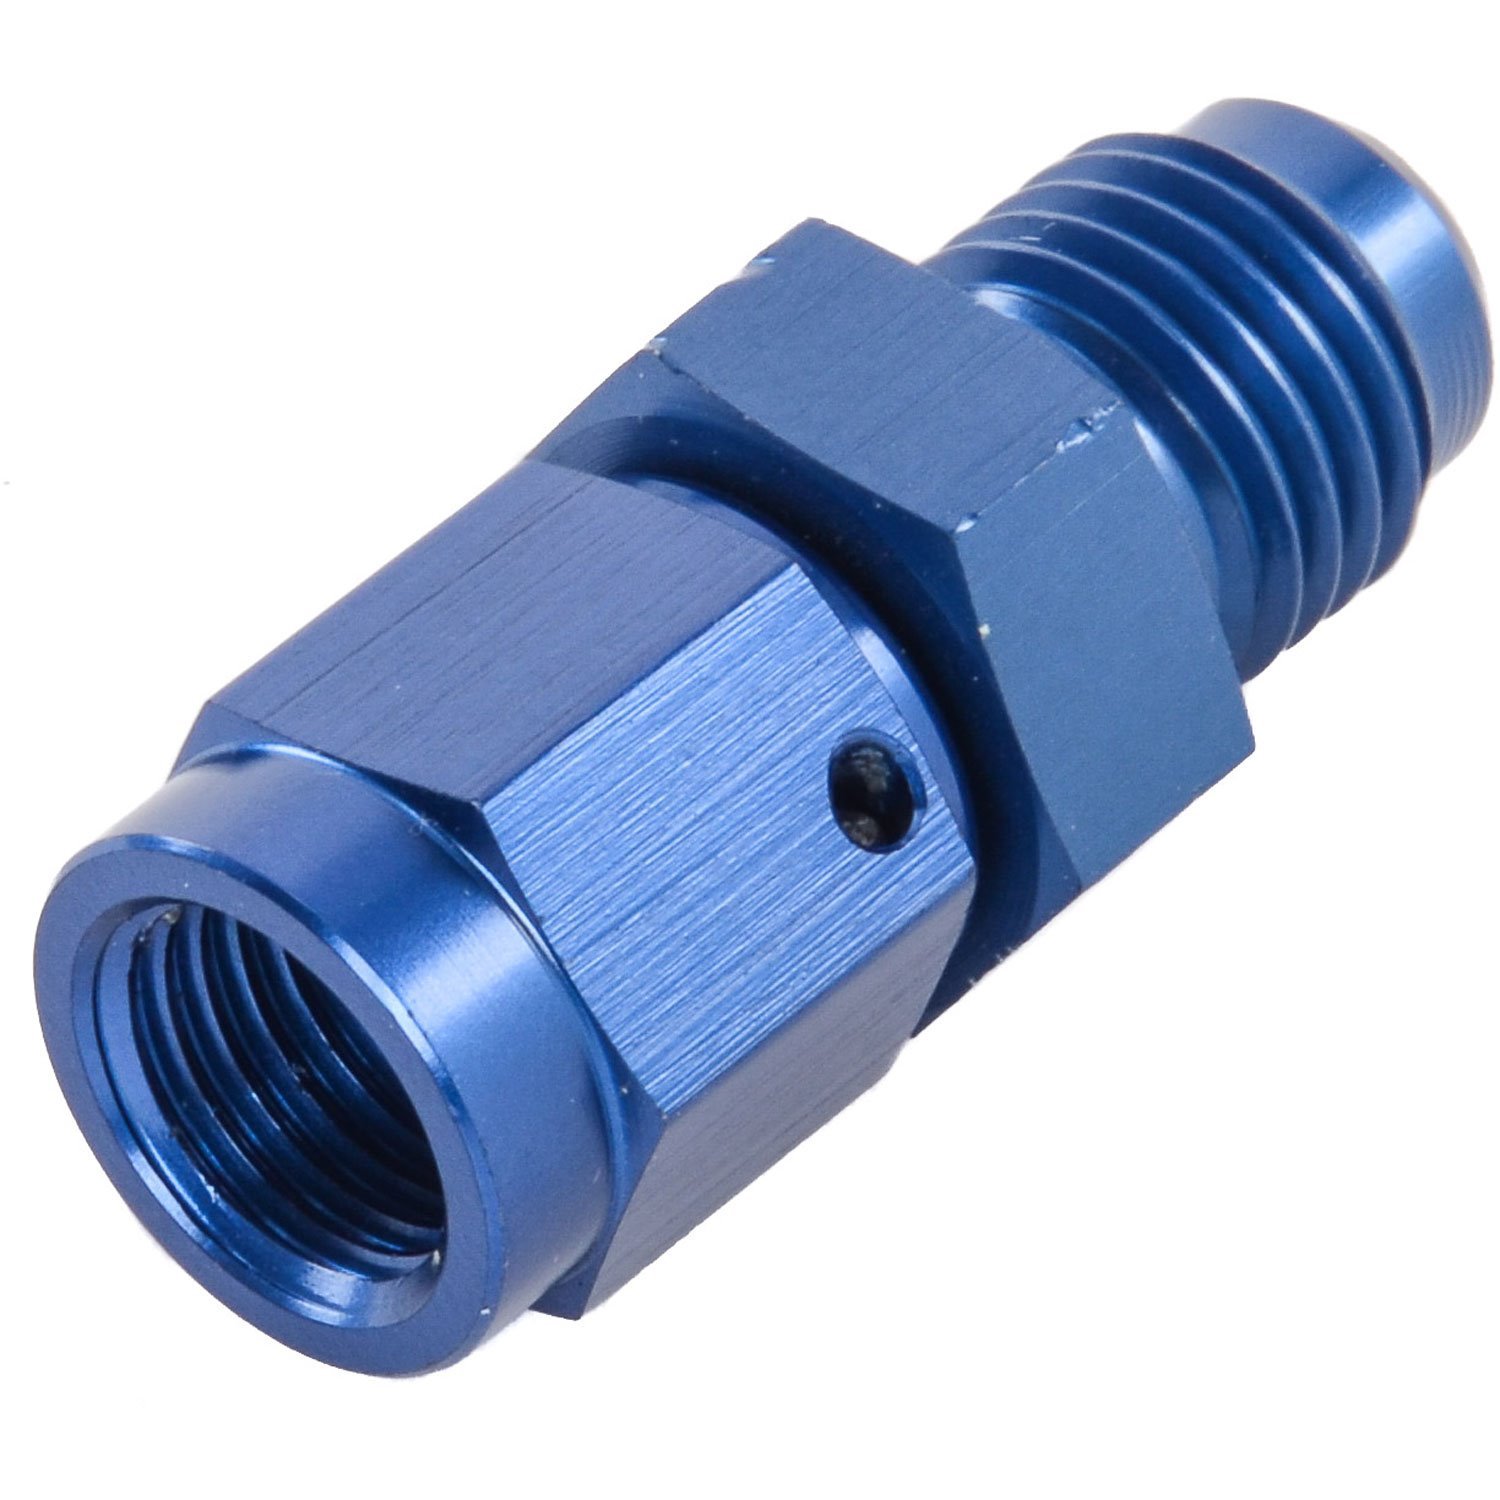 AN Female Swivel to Male Expander Fitting [-3 AN Female to -4 AN Male, Blue Hard Anodized]